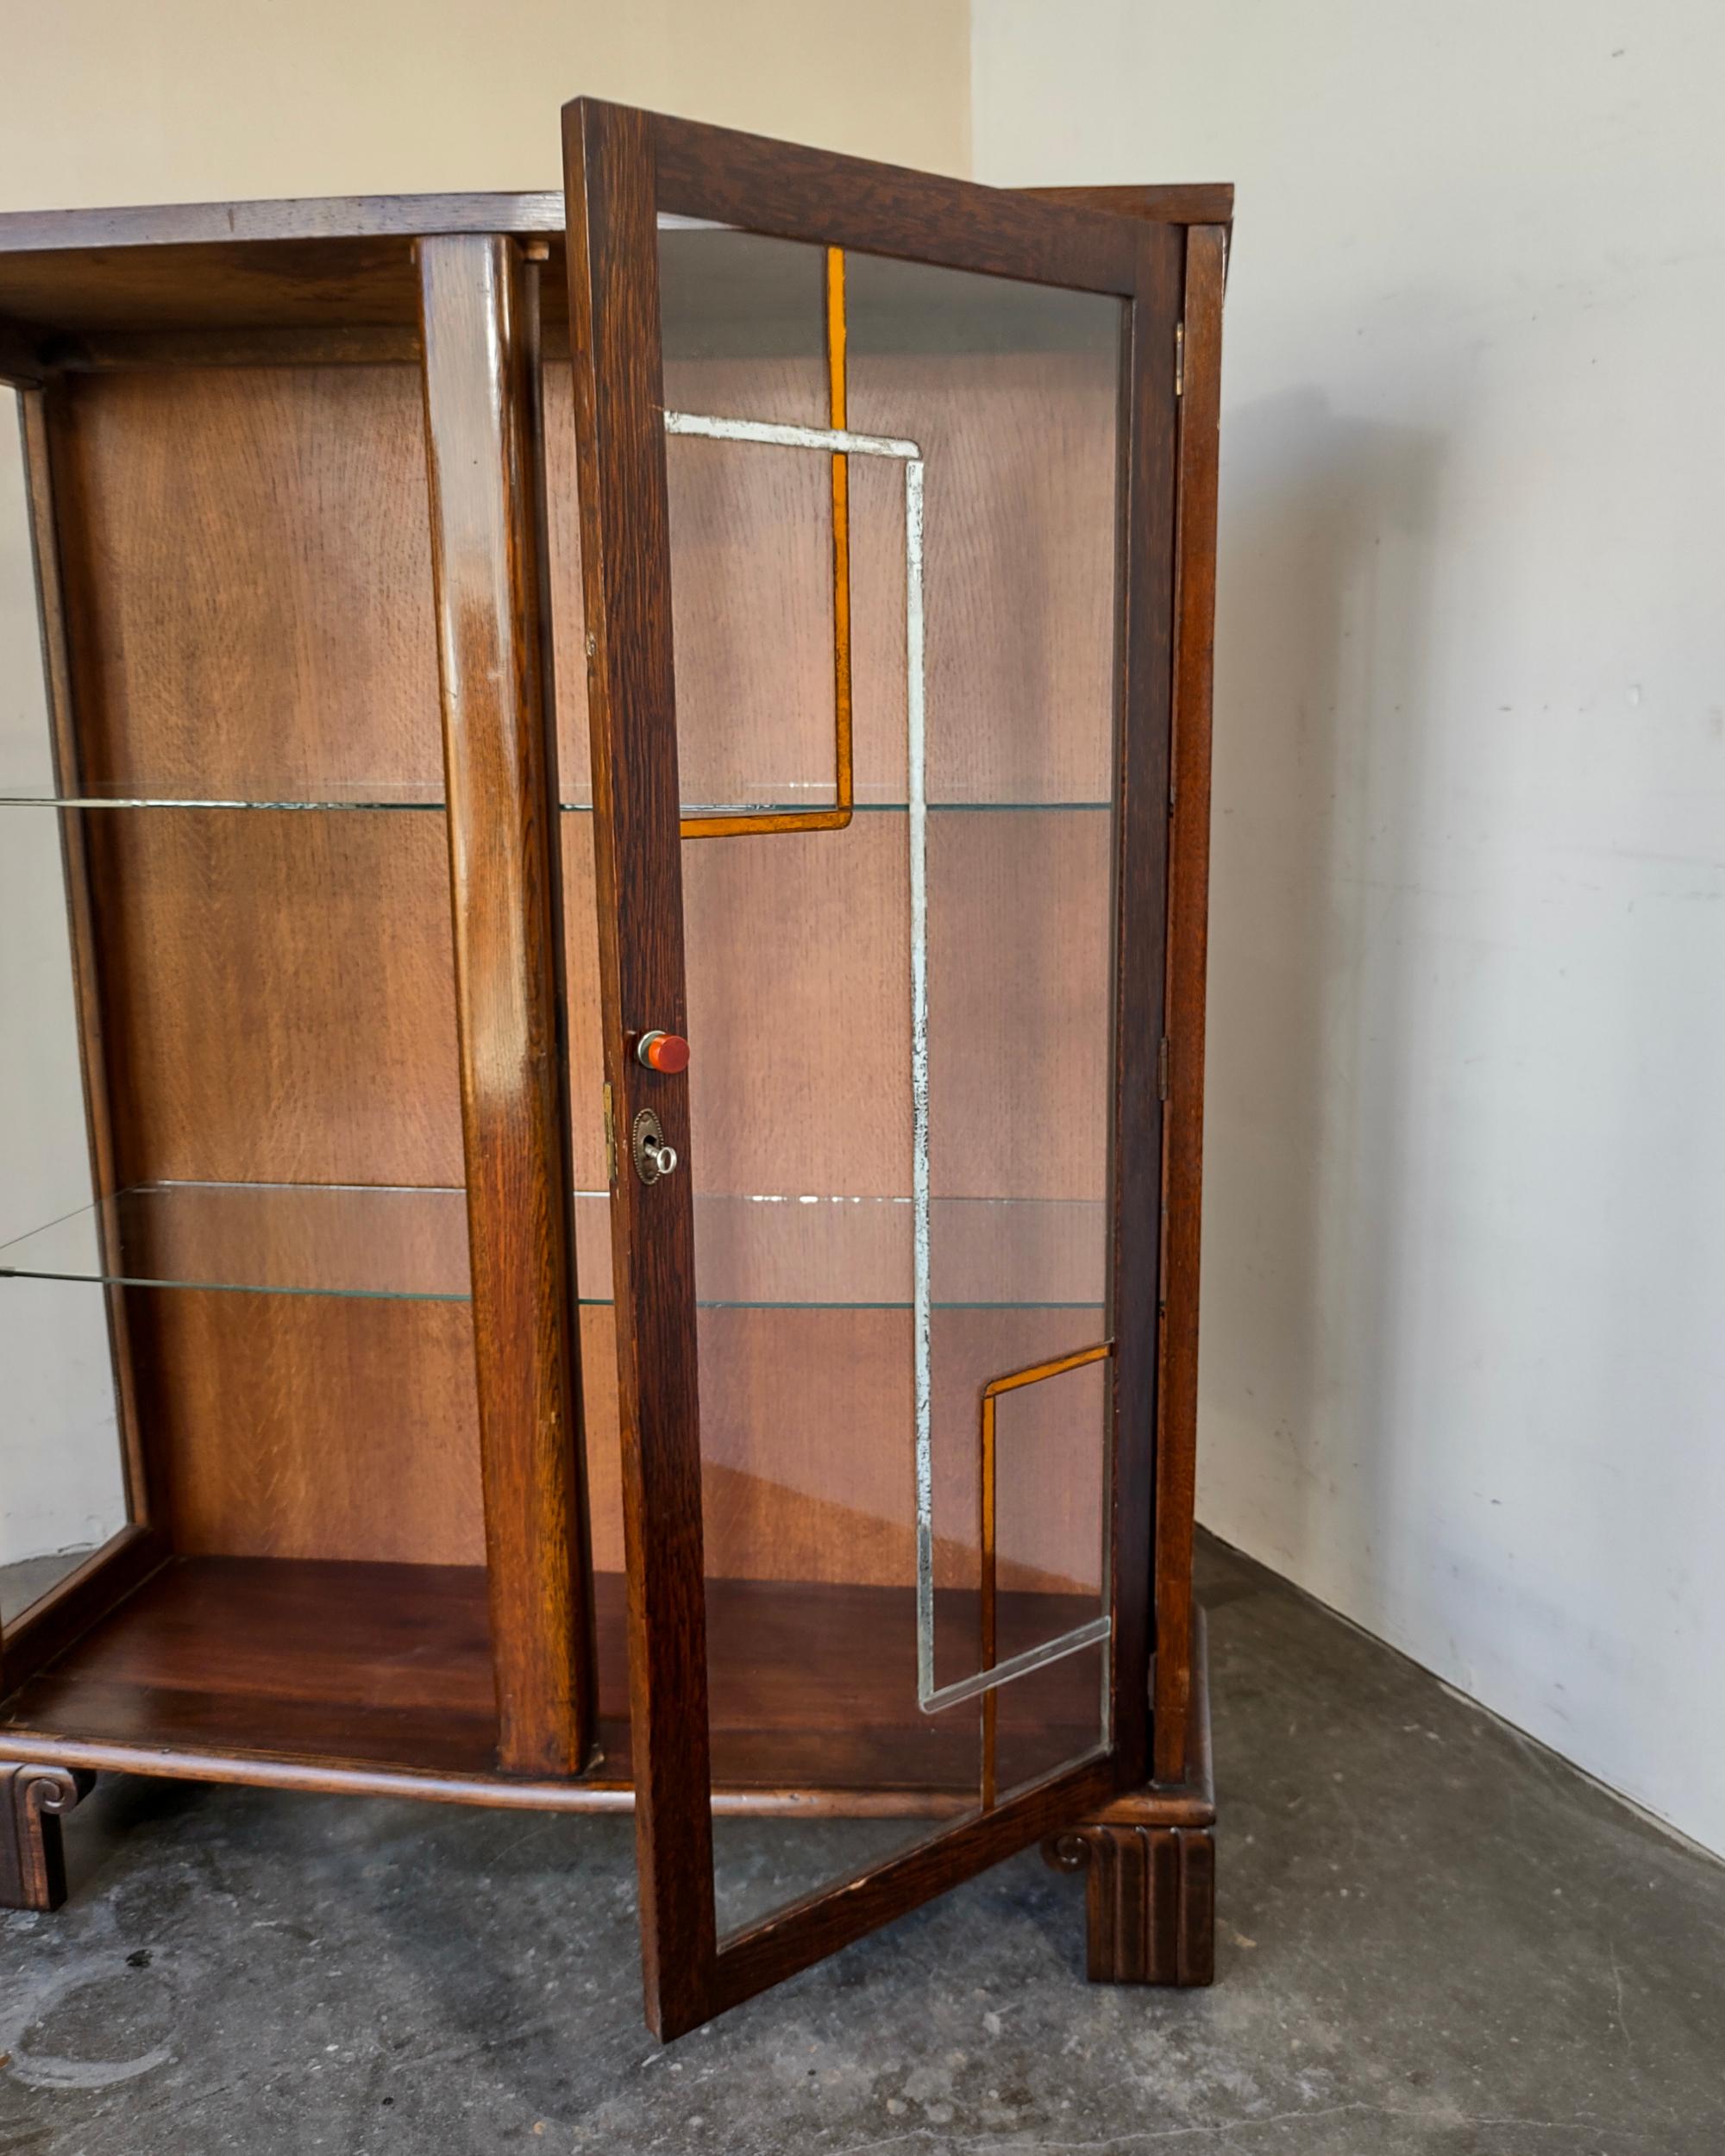 Early 20th Century 1920s Art Deco Glass Display Cabinet Curio with Decorative Mirror Details